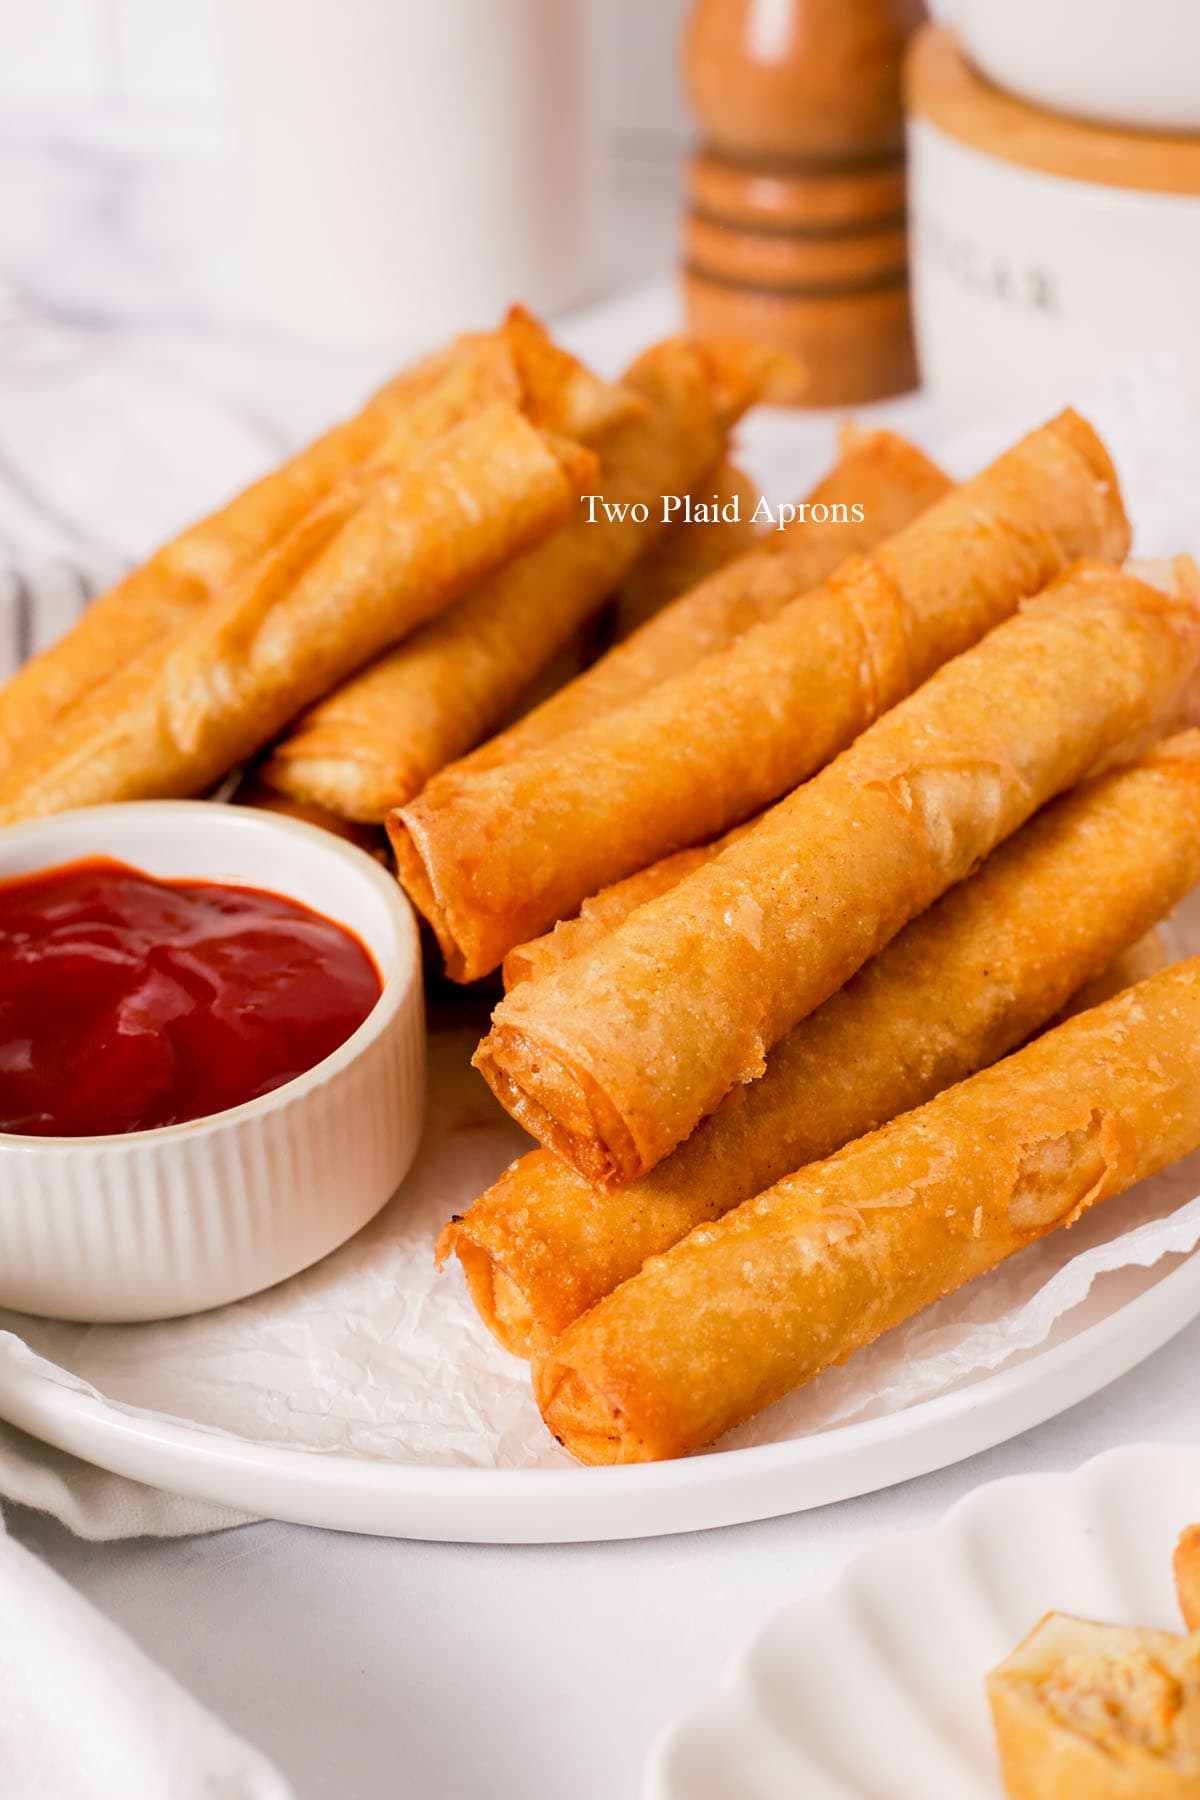 Lumpia on the plate.